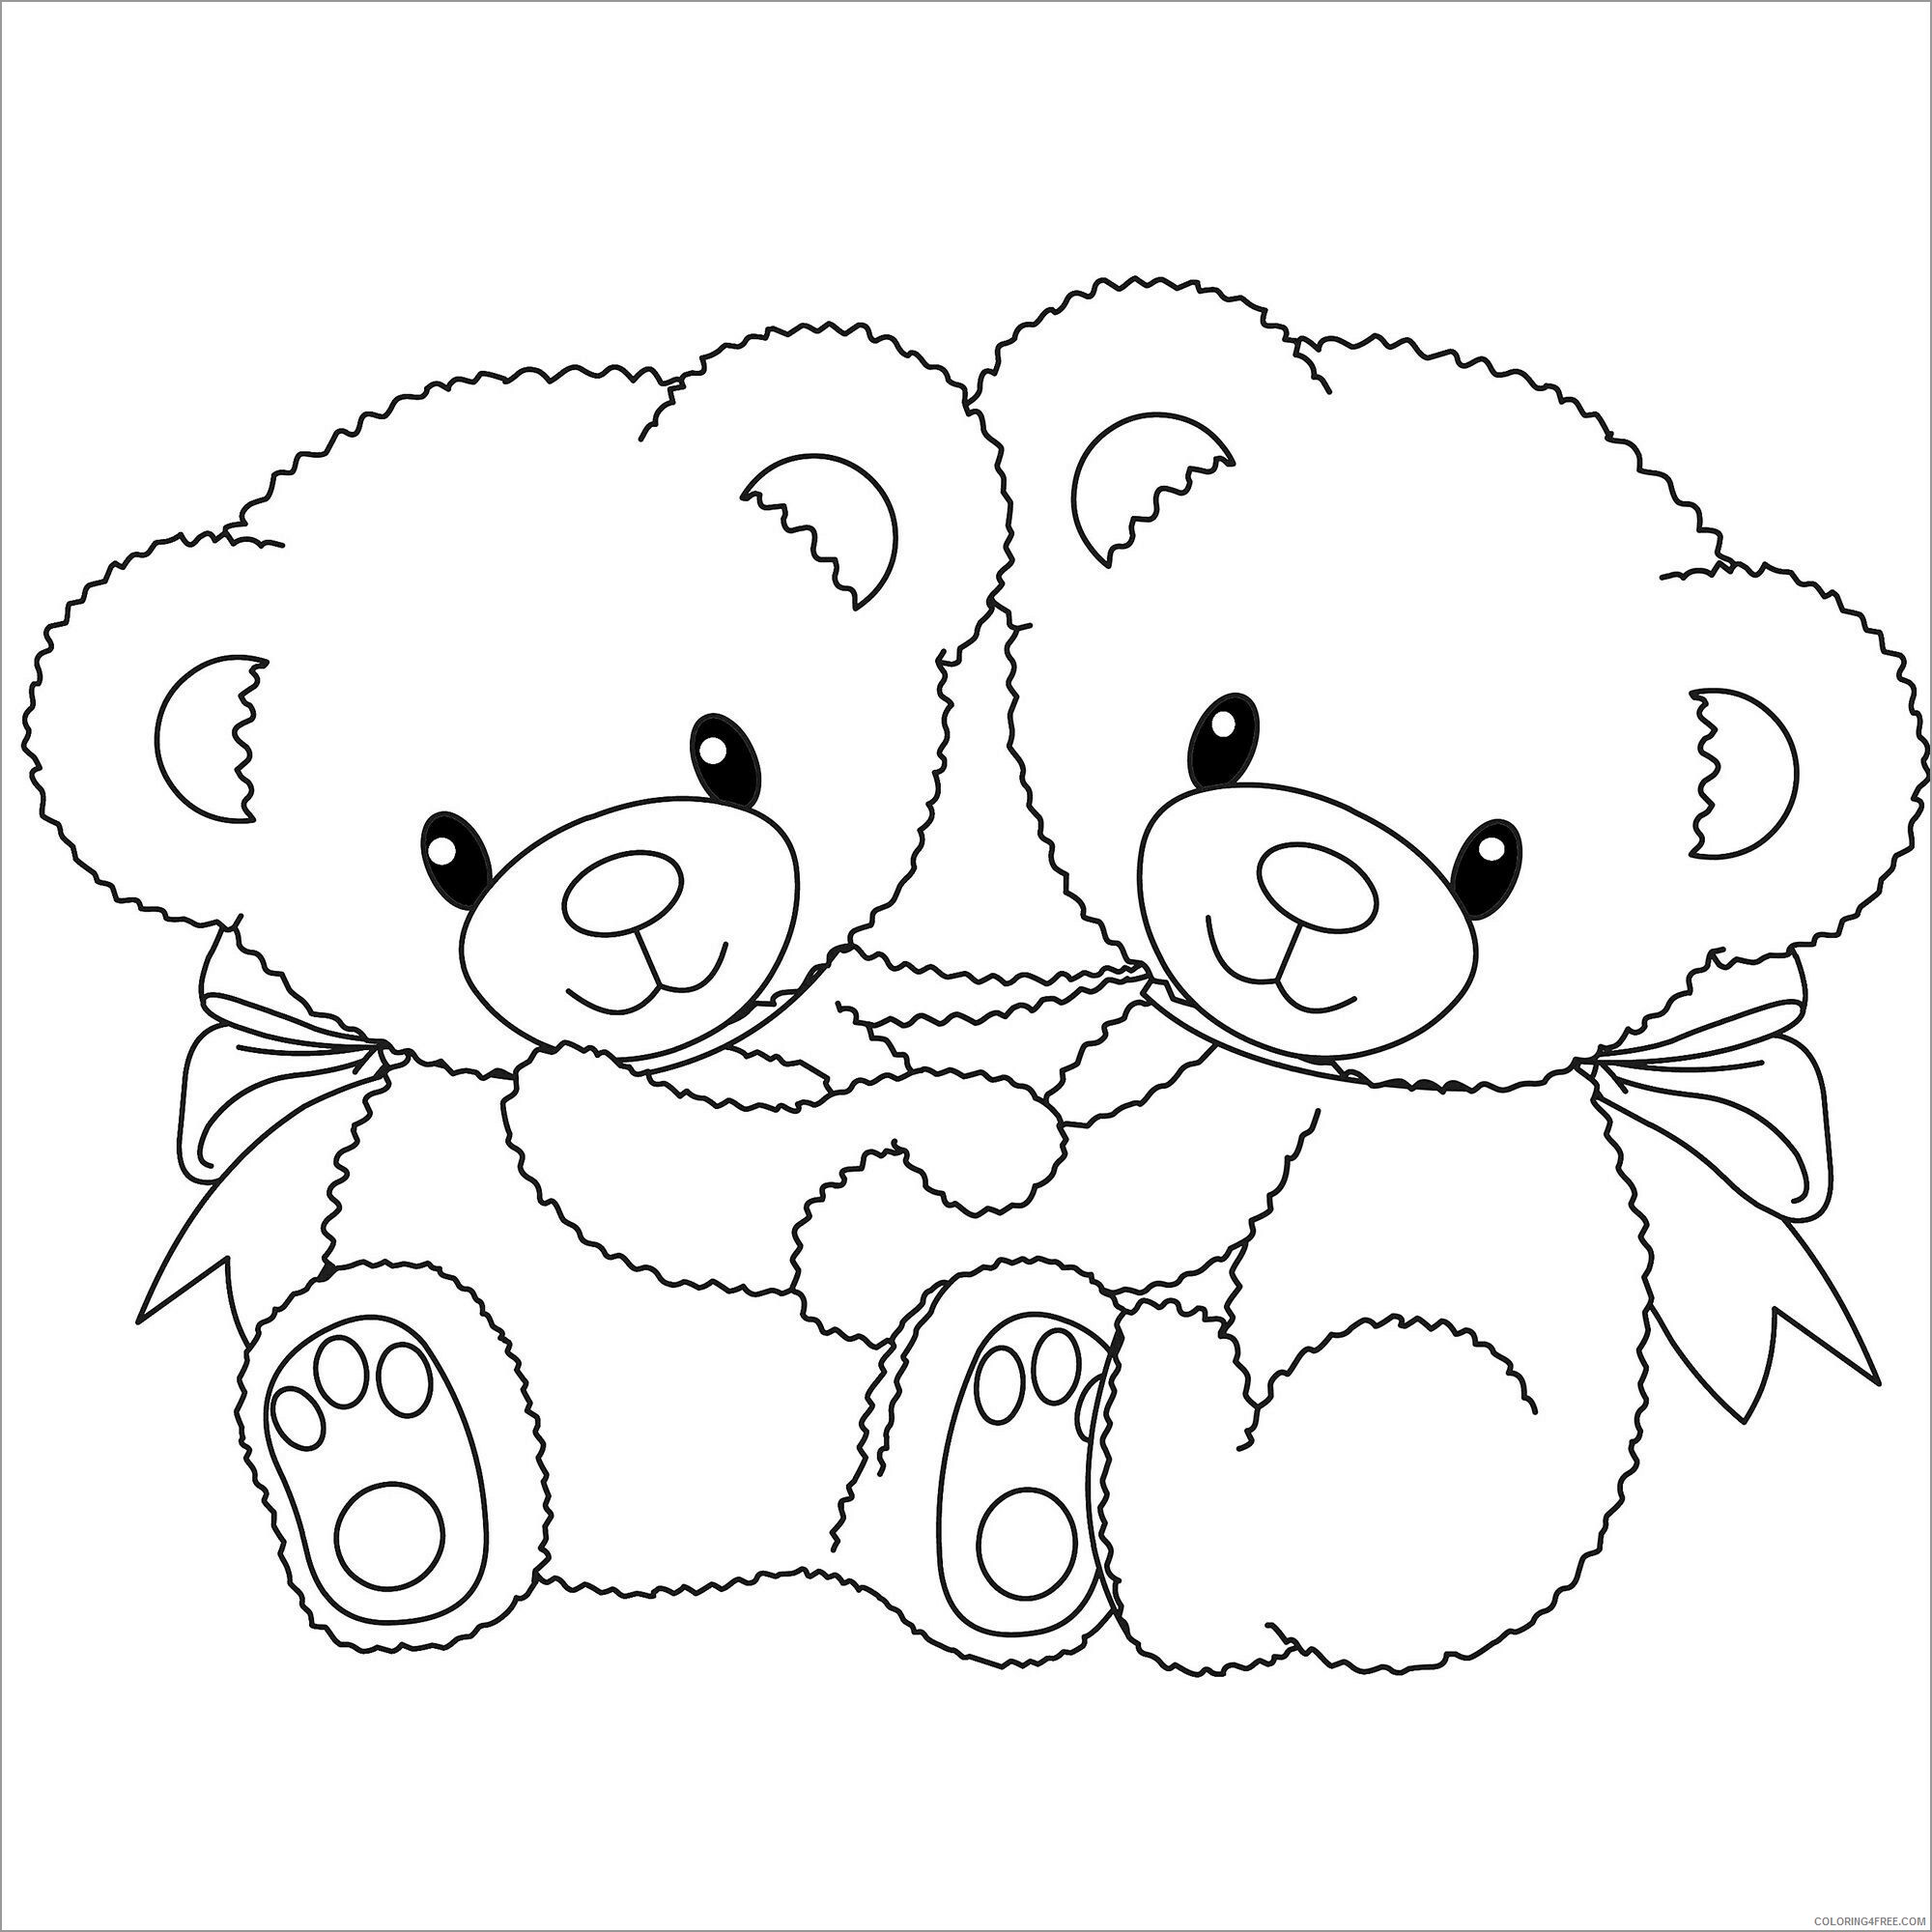 Bear Coloring Pages Animal Printable Sheets cute teddy bear 2021 0291 Coloring4free